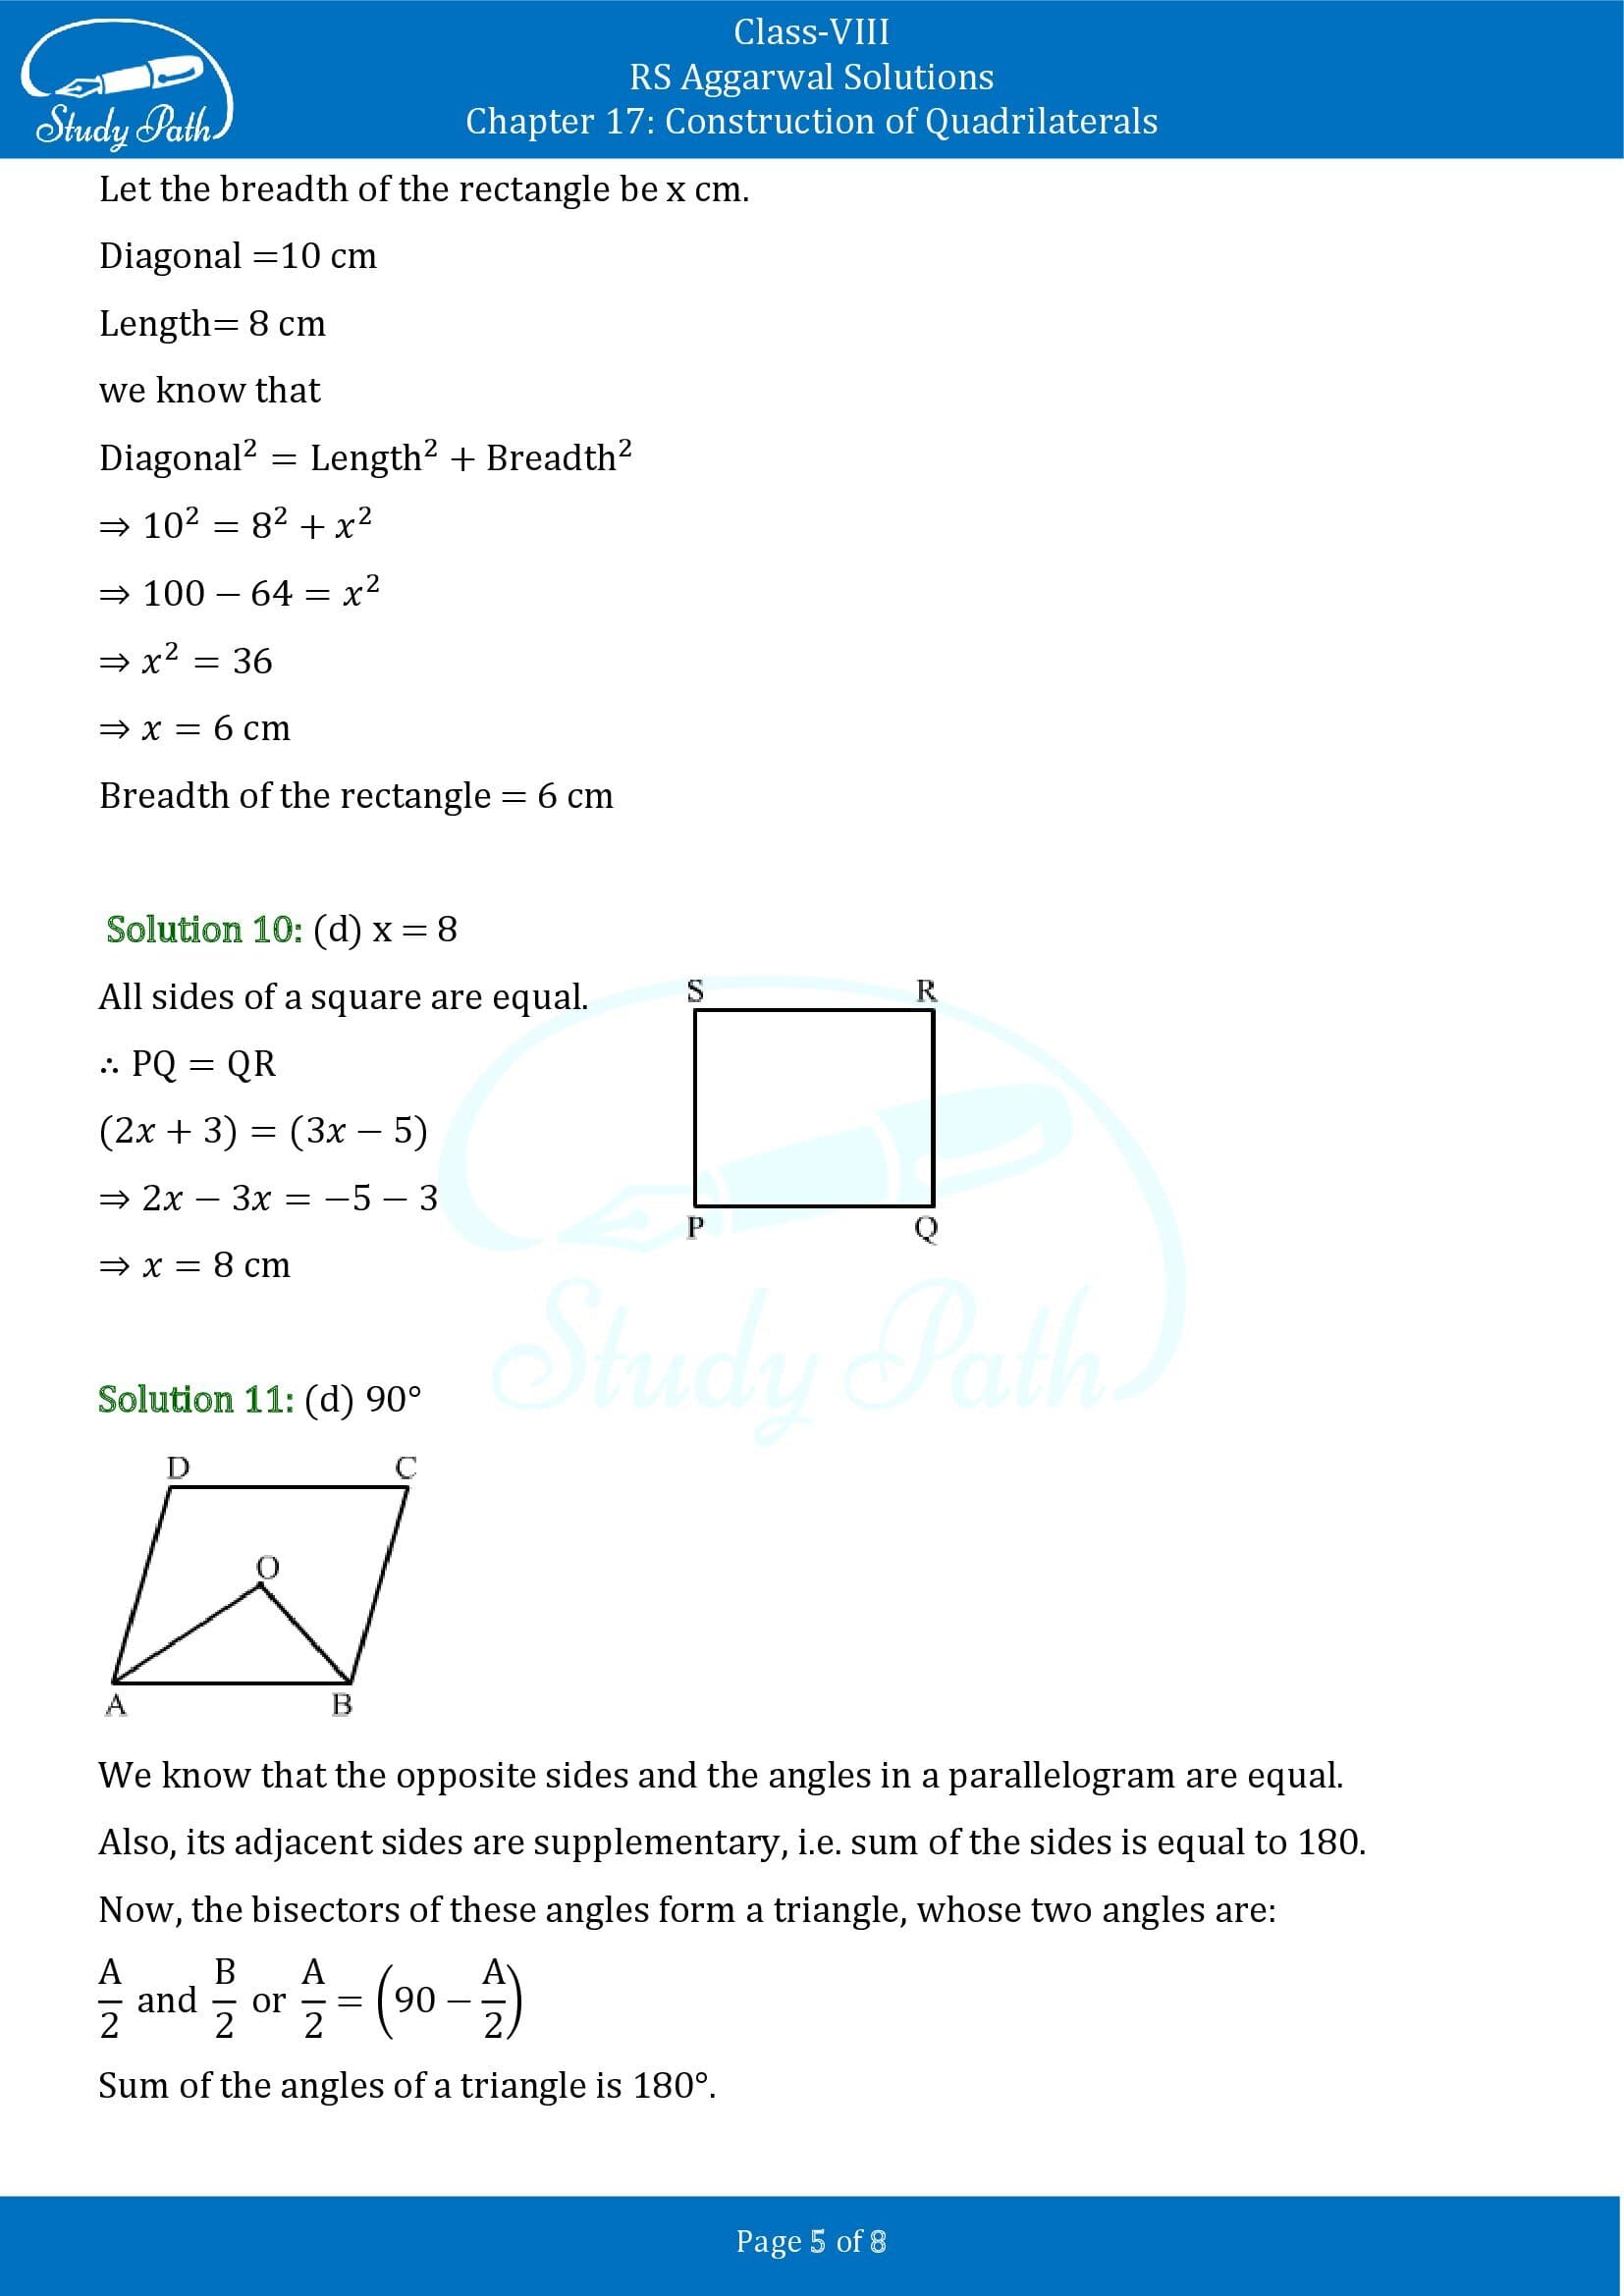 RS Aggarwal Solutions Class 8 Chapter 17 Construction of Quadrilaterals Test Paper 0005